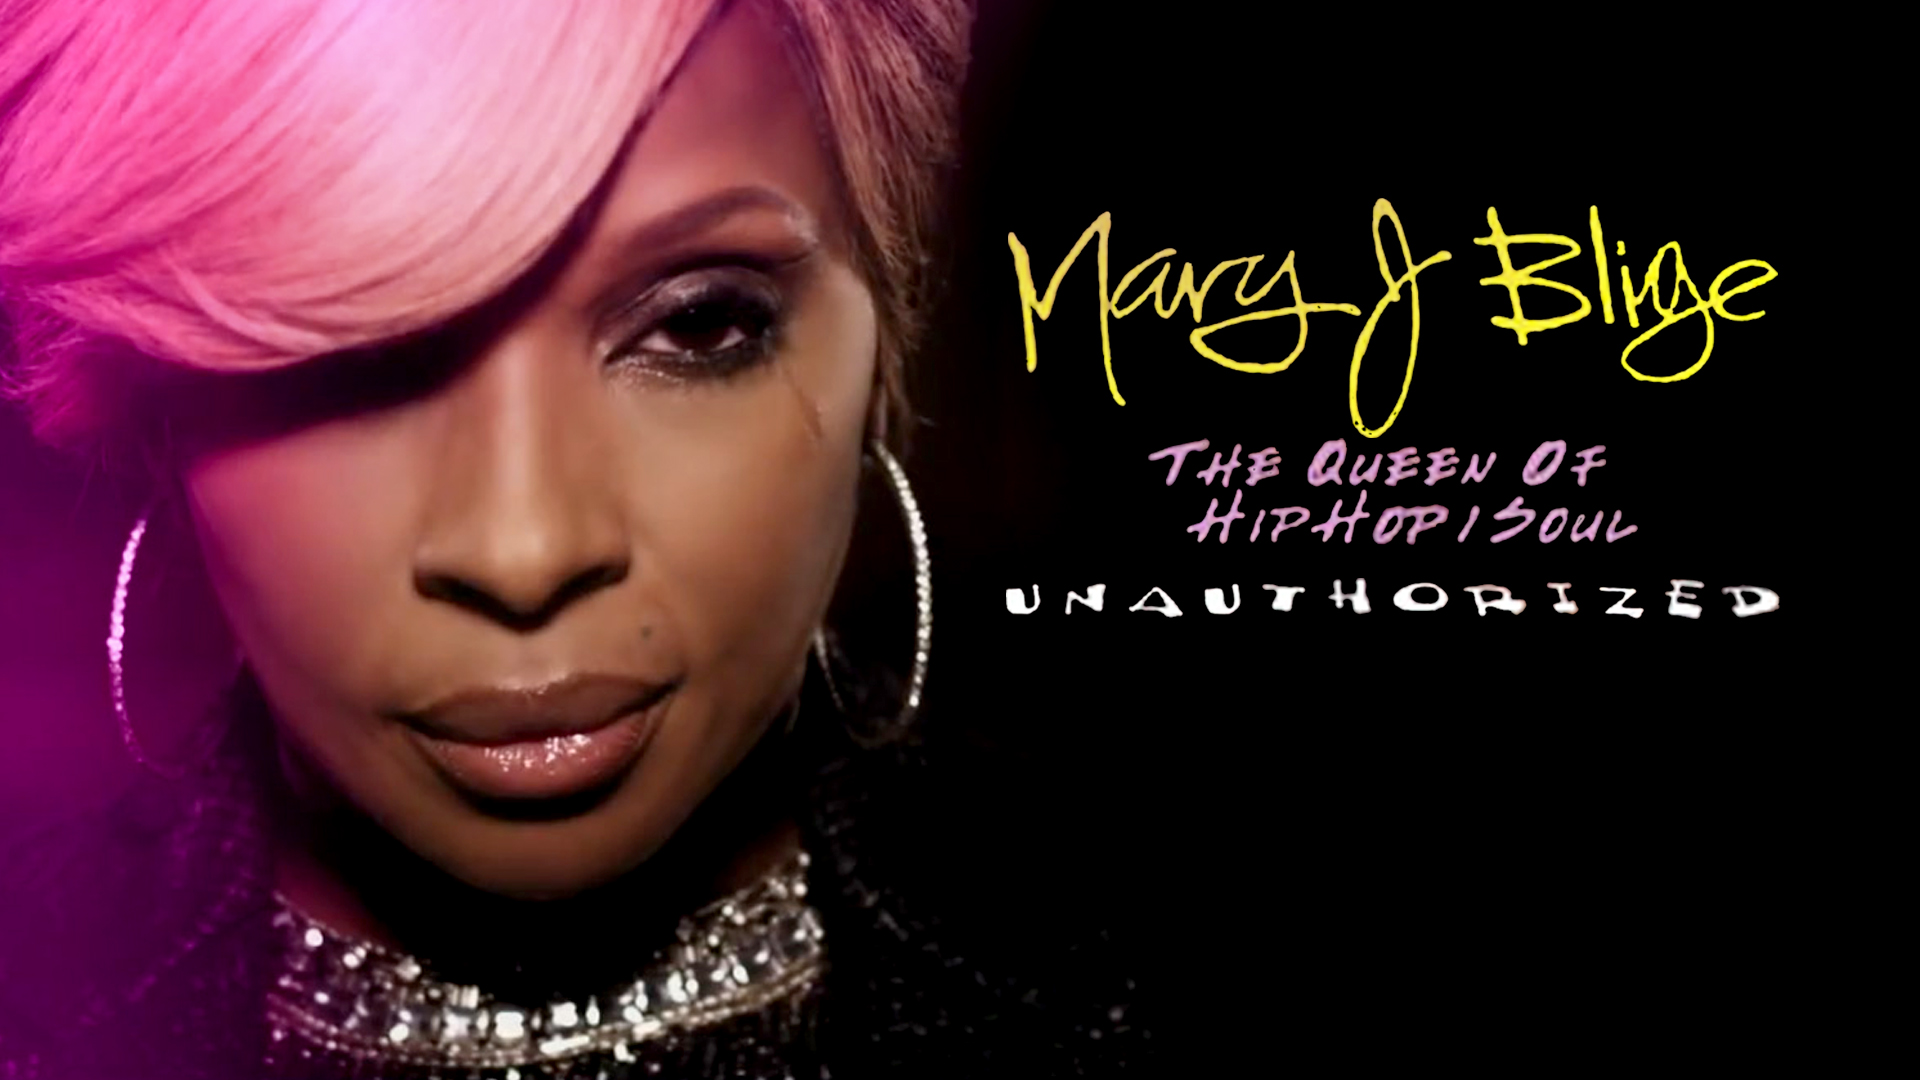 Mary J Blige: The Queen Of Hip Hop Soul